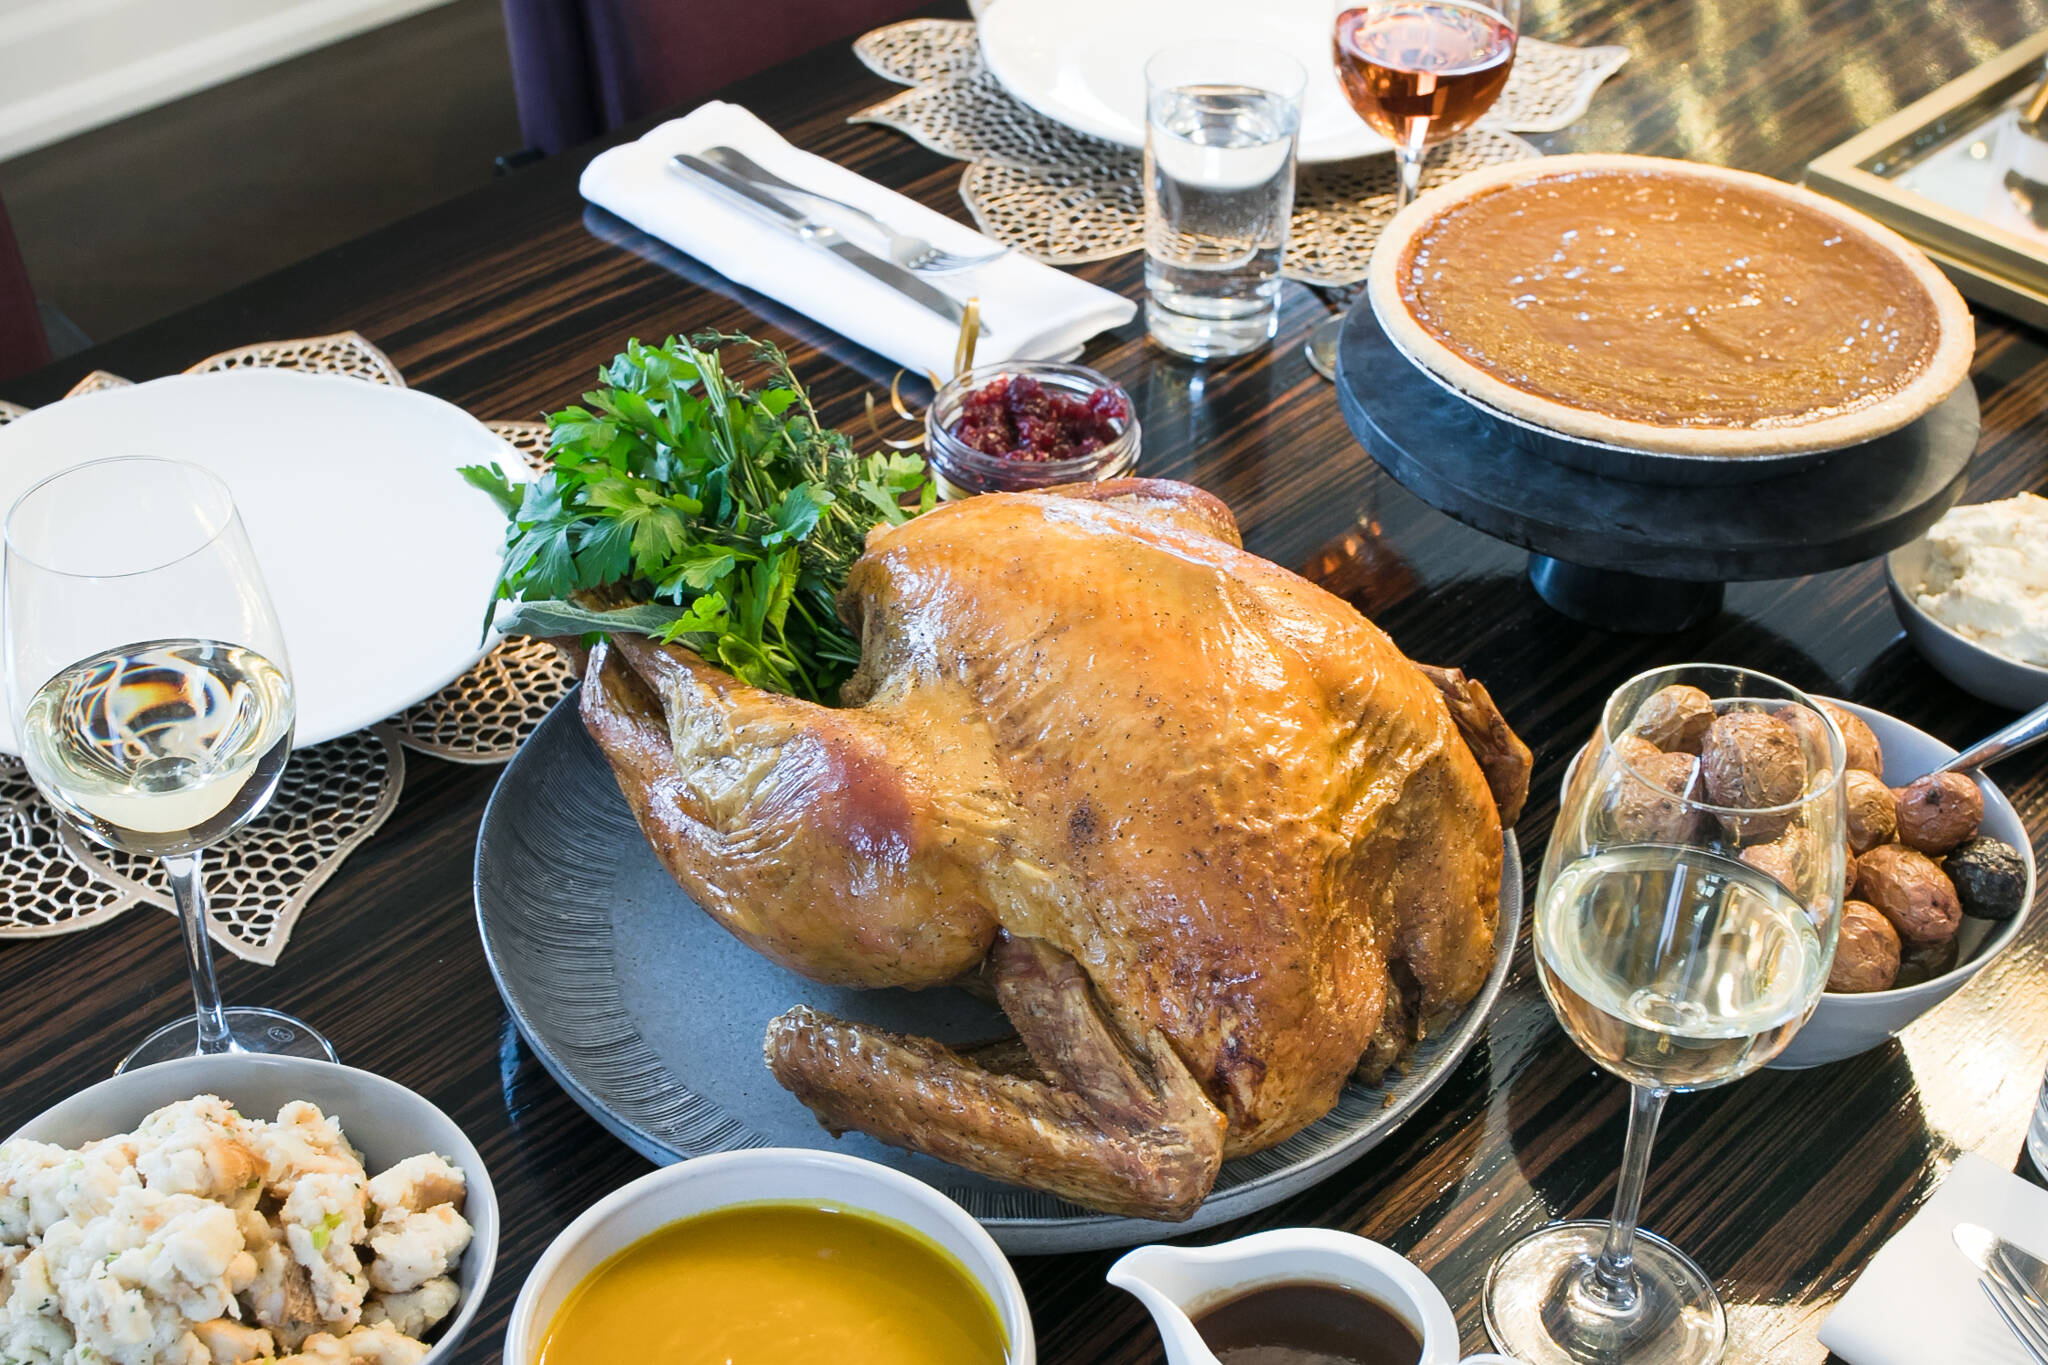 15 takeout and delivery options for Thanksgiving dinner in Toronto